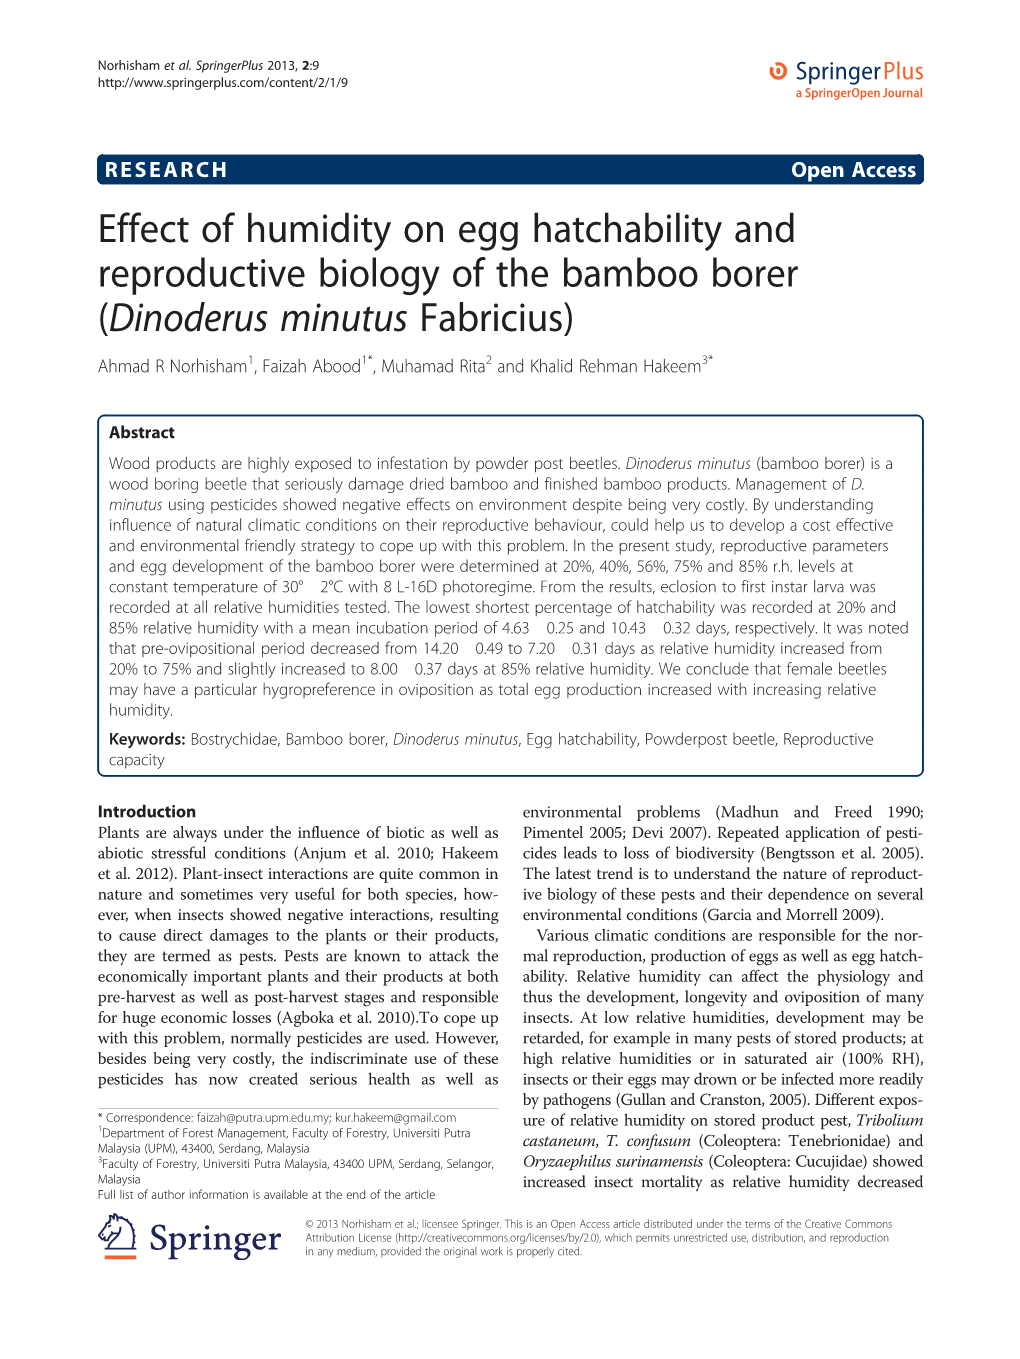 Effect of Humidity on Egg Hatchability and Reproductive Biology of the Bamboo Borer (Dinoderus Minutus Fabricius)